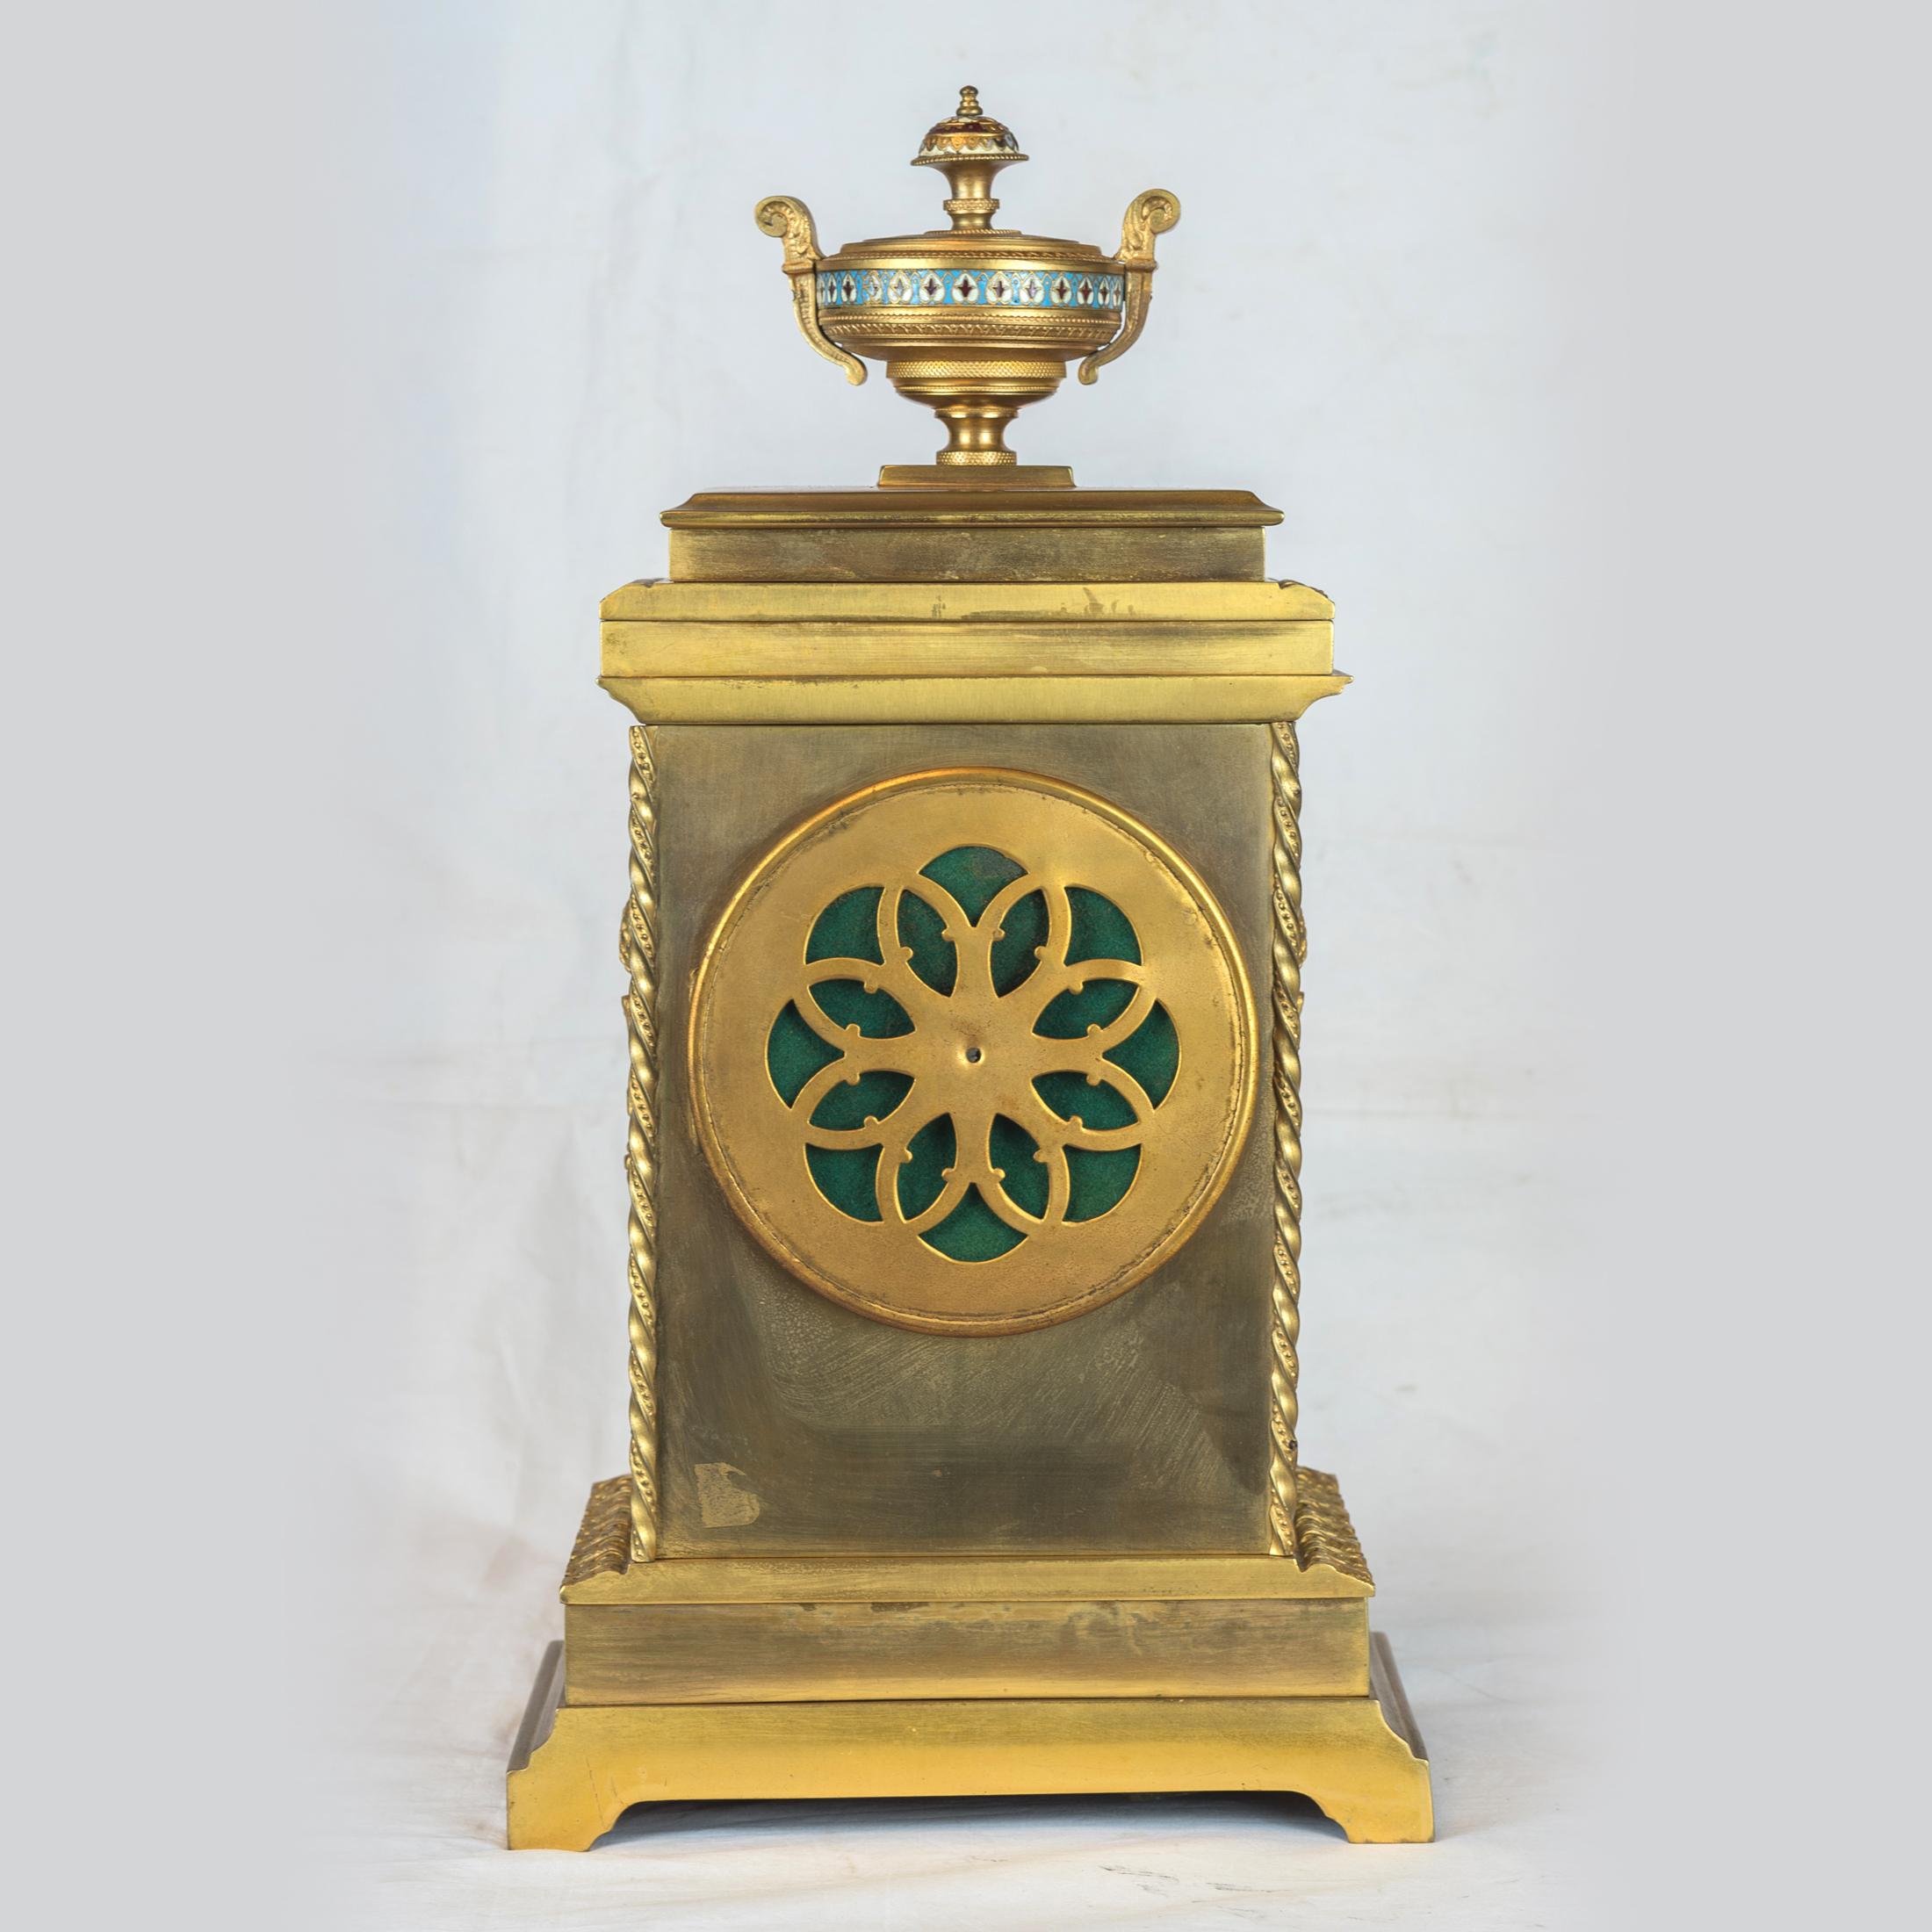 Fabulous Late 19th Century French Champleve Enamel and Gilt-Bronze Mantel Clock For Sale 1